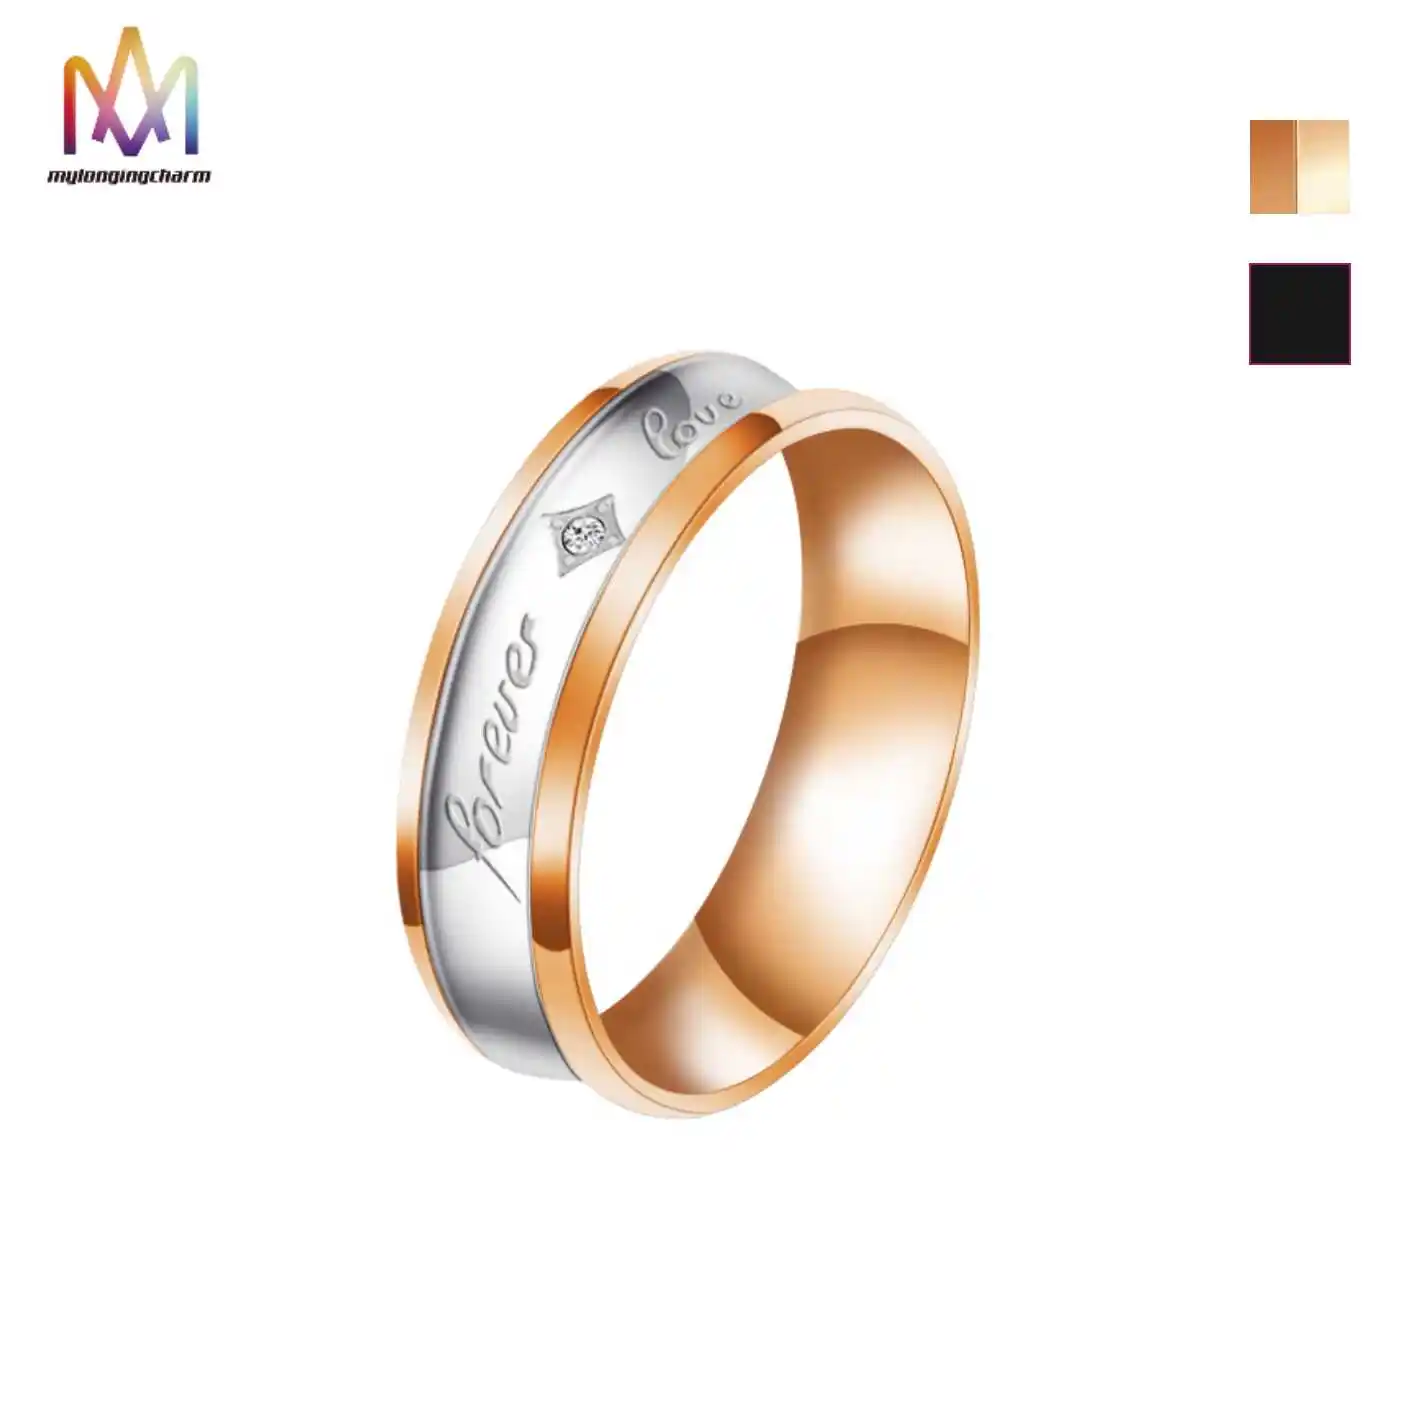 Forever Love Couple Rings Custom Romantic Gorgeous Two Color Stainless Steel Lovers Wedding Rings Set Couple Engagement